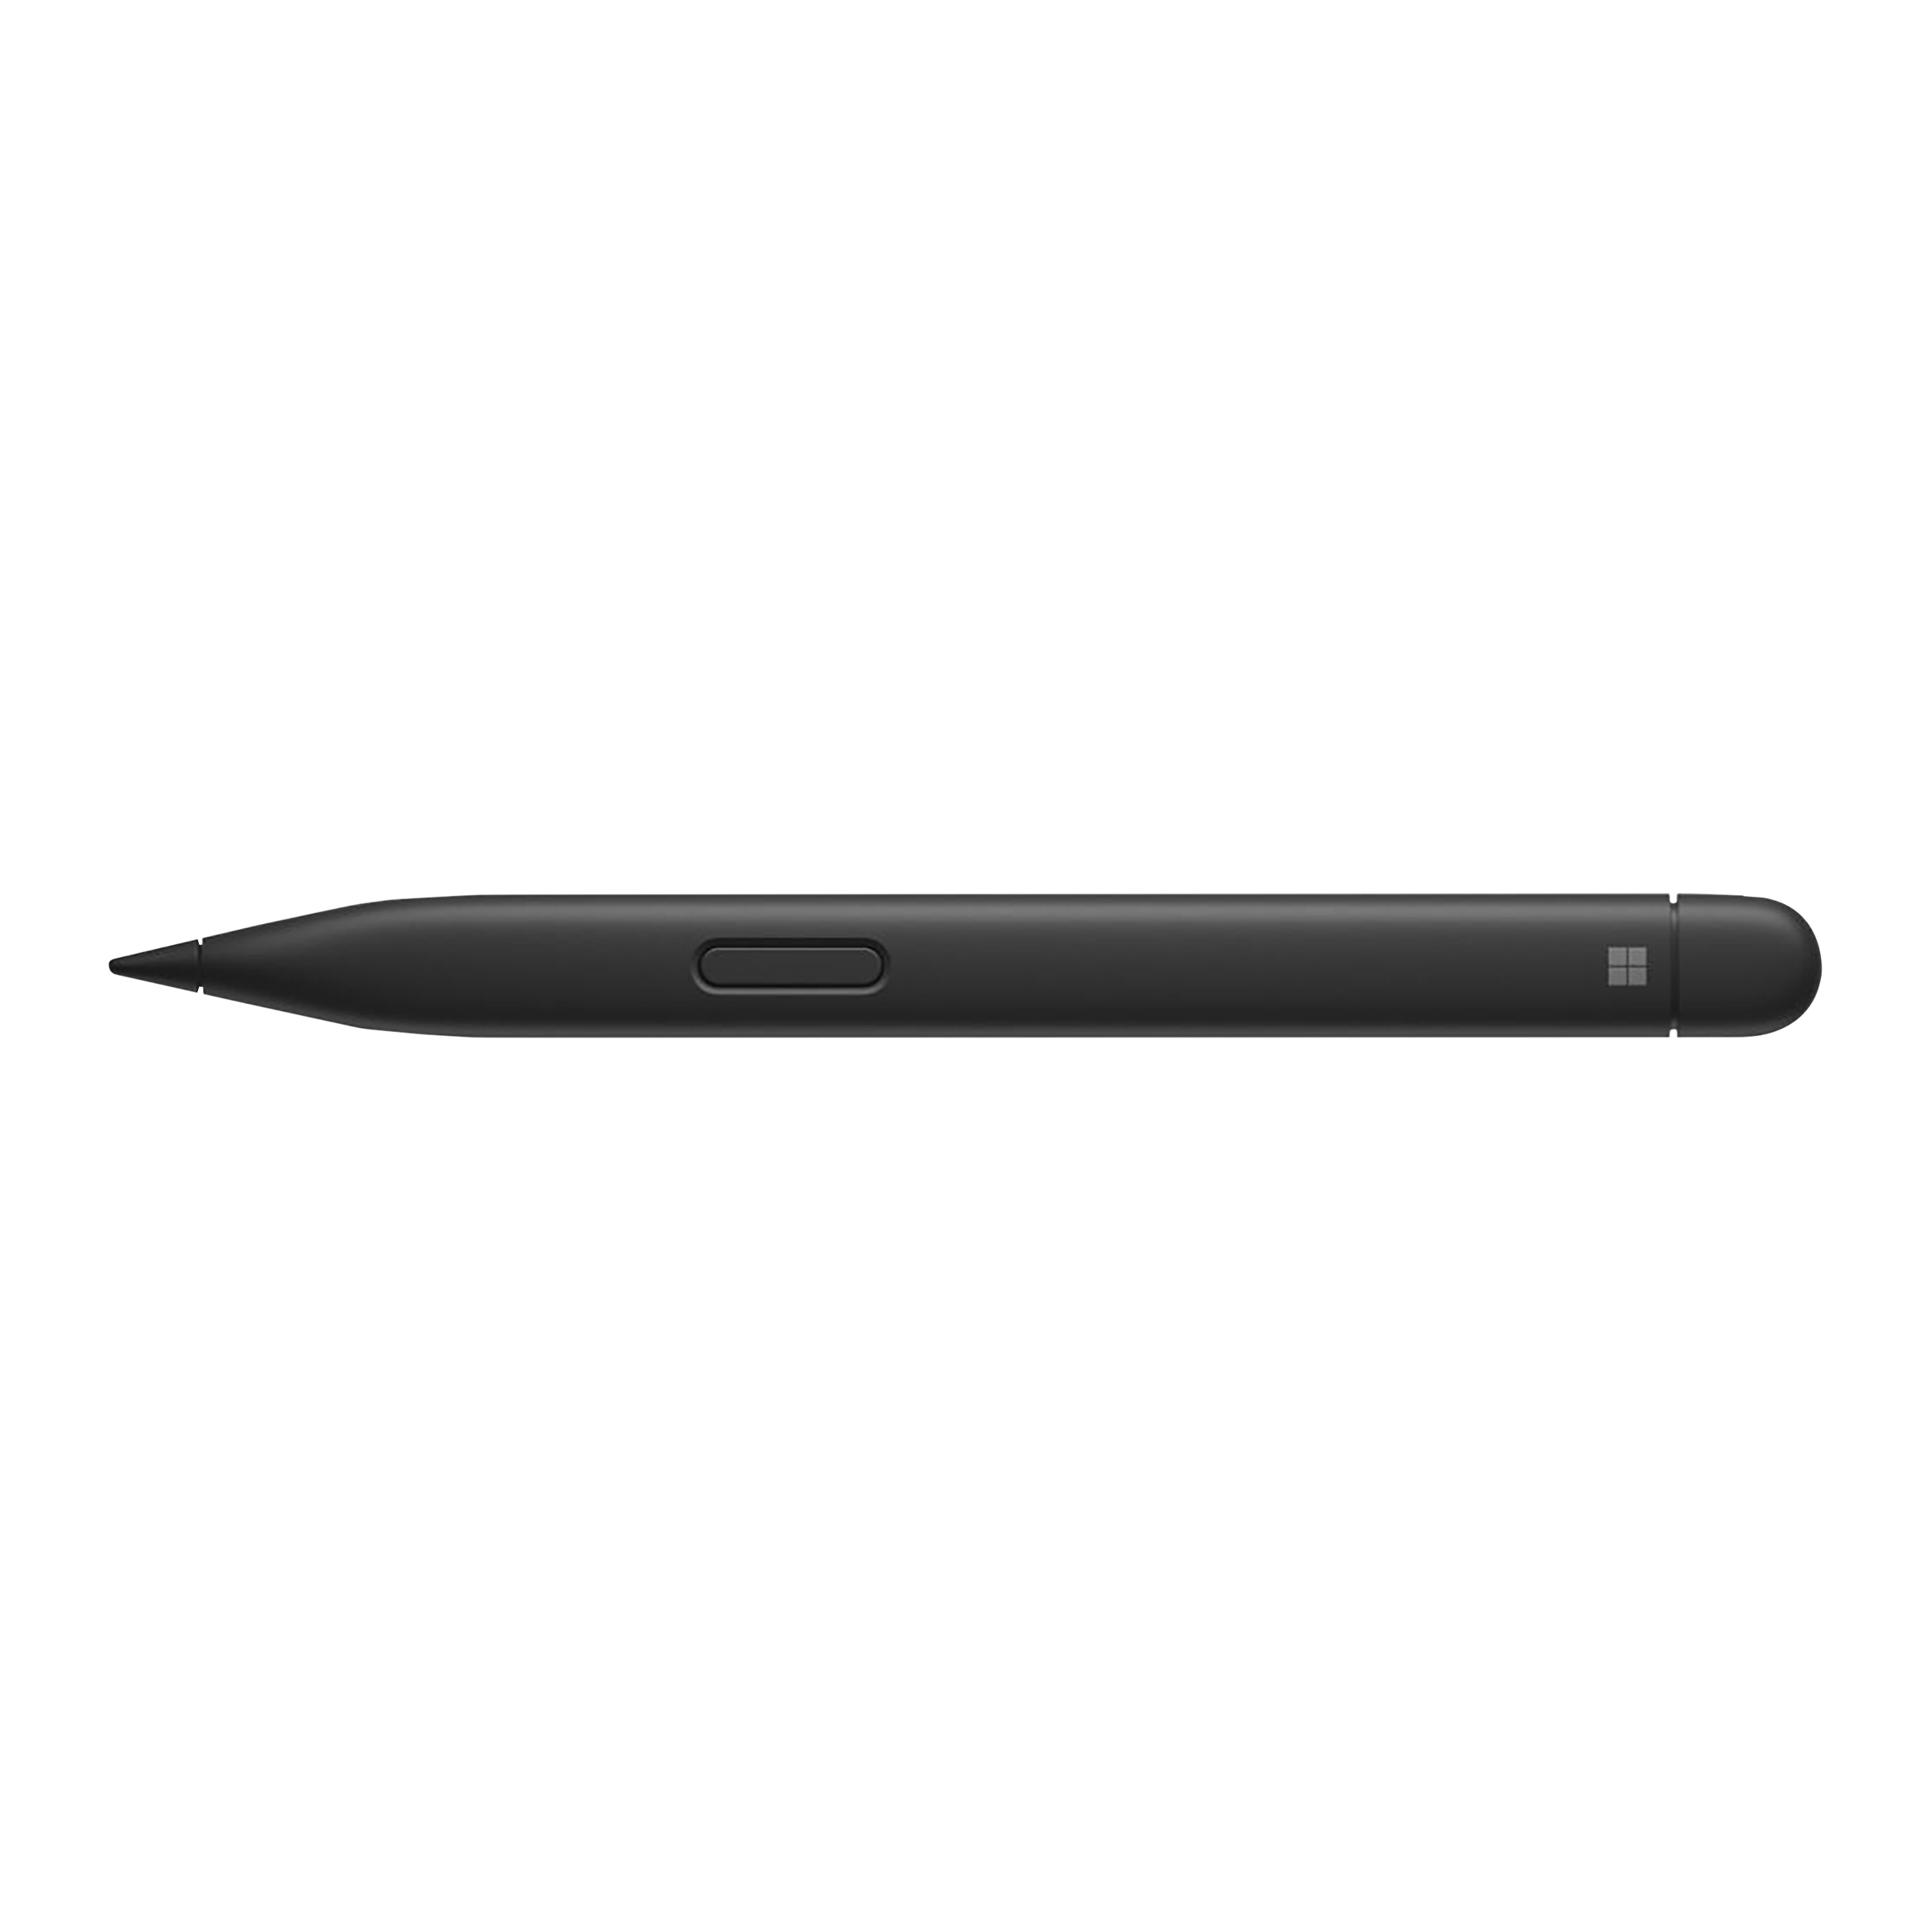 Microsoft Surface Slim Pen 2 (Up To 15 Hours Of Usage, 8WV-00005, Black)